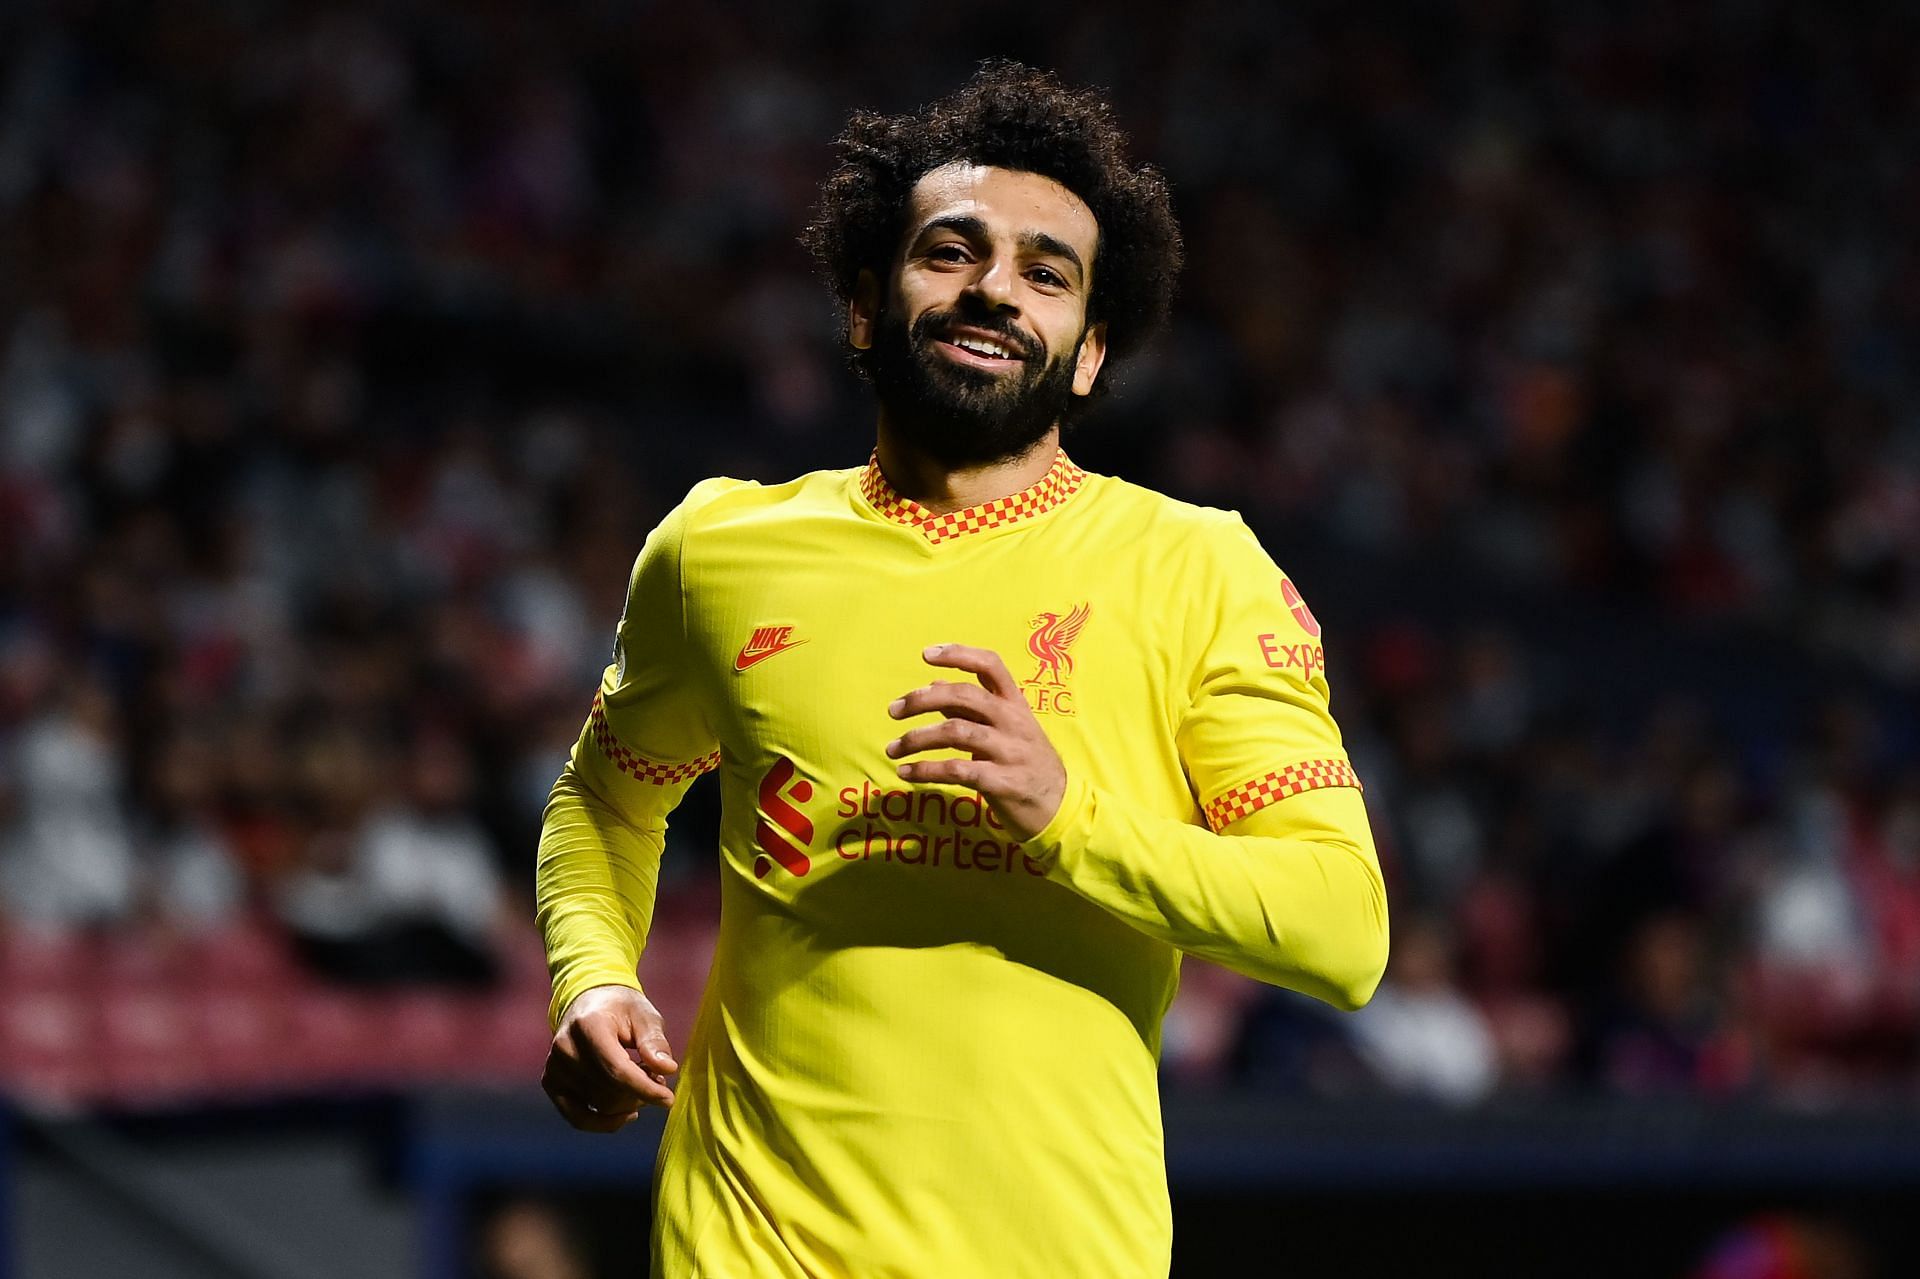 Mohamed Salah has been in scintillating form for Liverpool this season, with 12 goals and four assists to his name